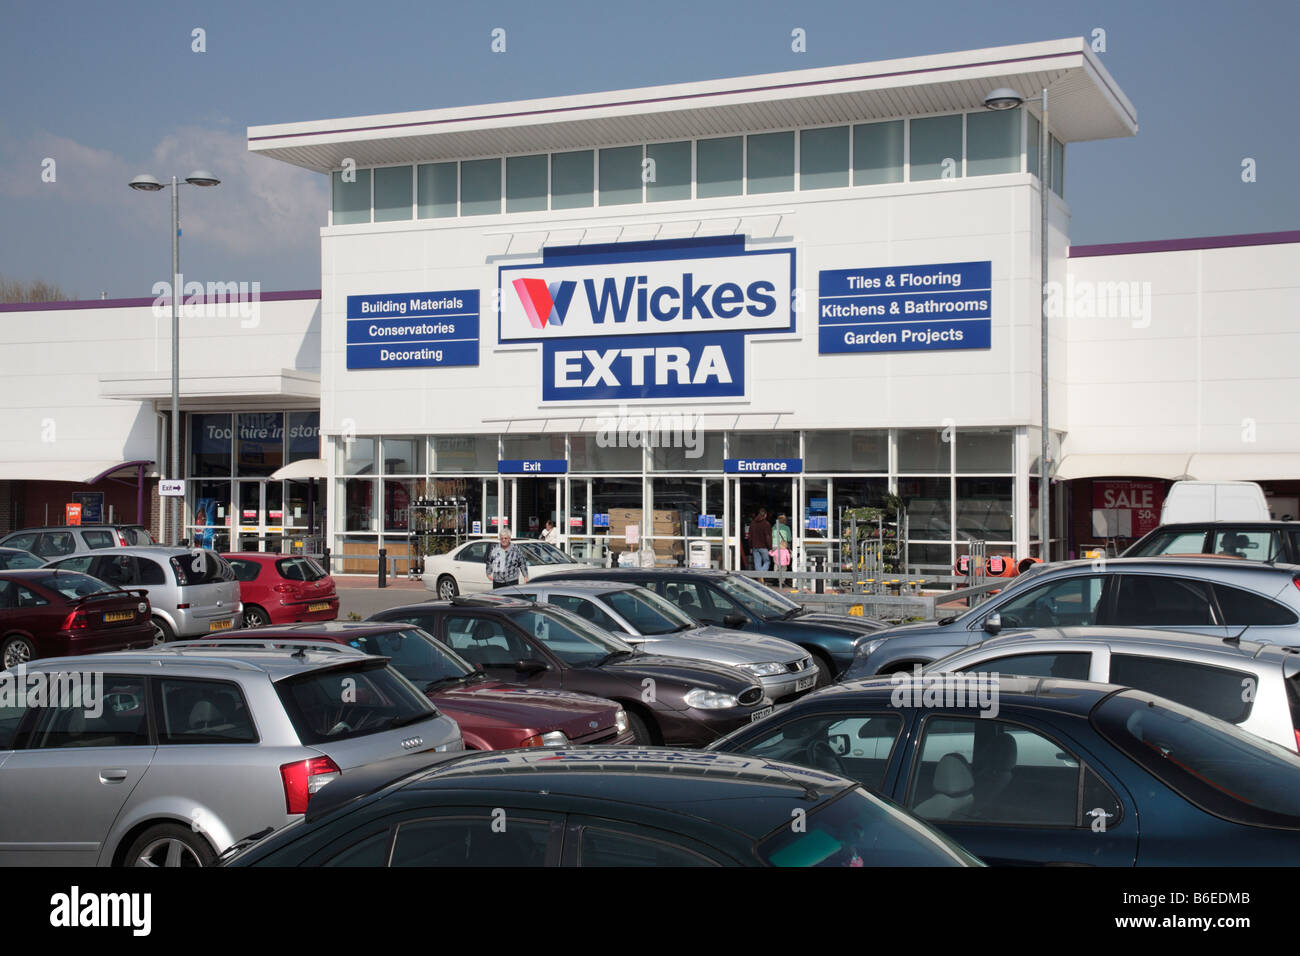 Wickes bricolage Extra Superstore, Cambridge Fermer Retail Park, Aylesbury Banque D'Images